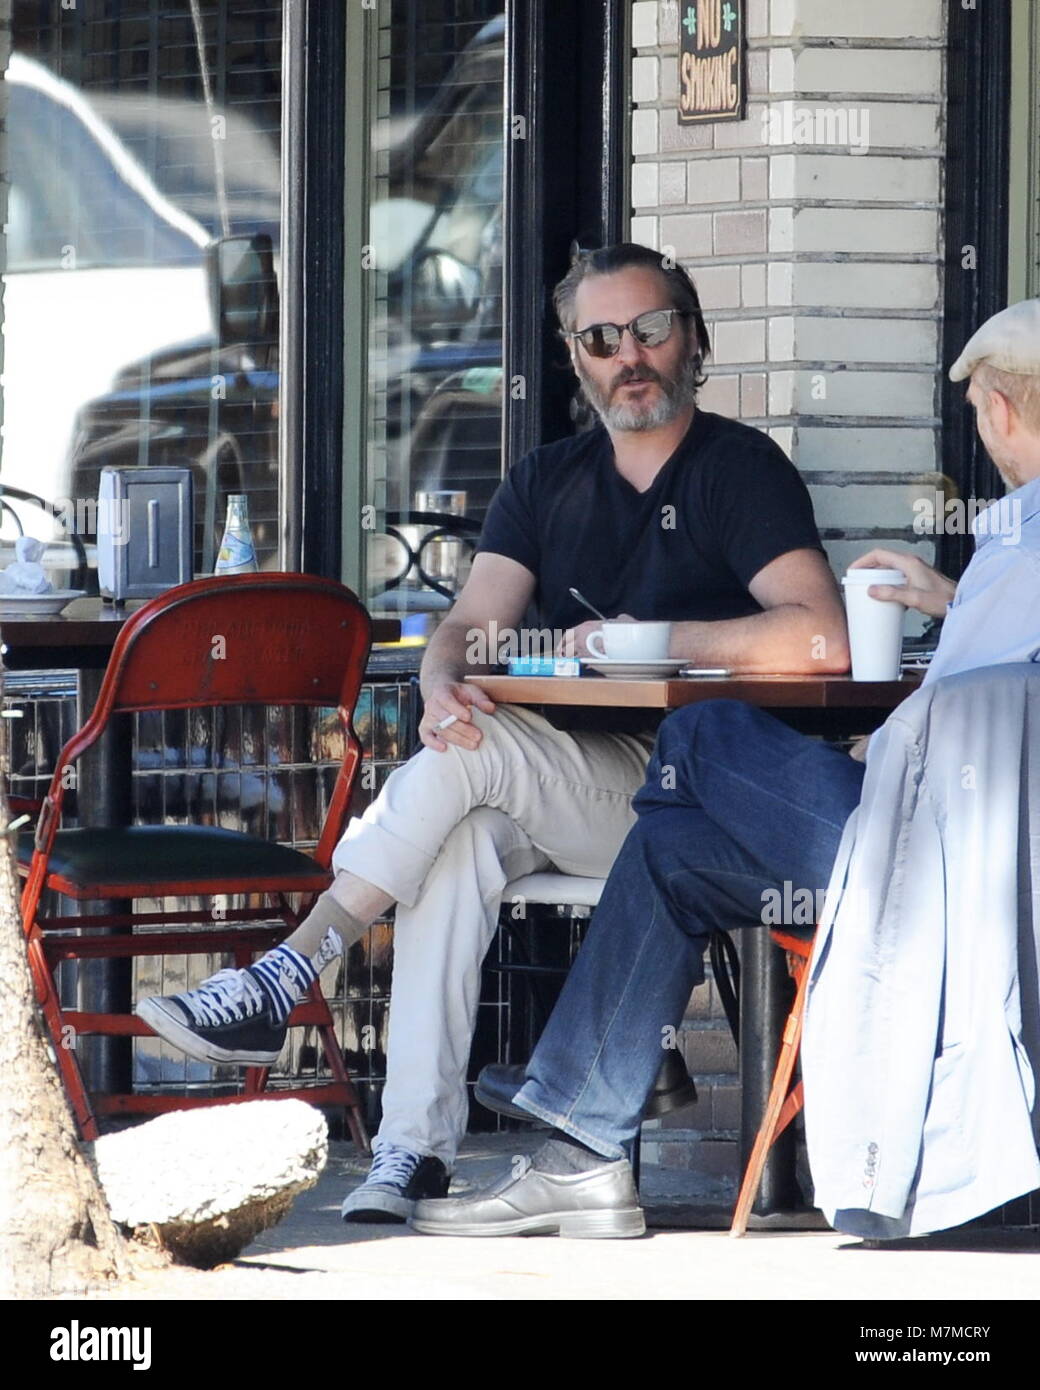 Actor Jaoquin Phoenix gets animated on a conversation with a friend while  having coffee at Little Dom's in Los Angeles. Featuring: Joaquin Phoenix  Where: Los Angeles, California, United States When: 09 Feb